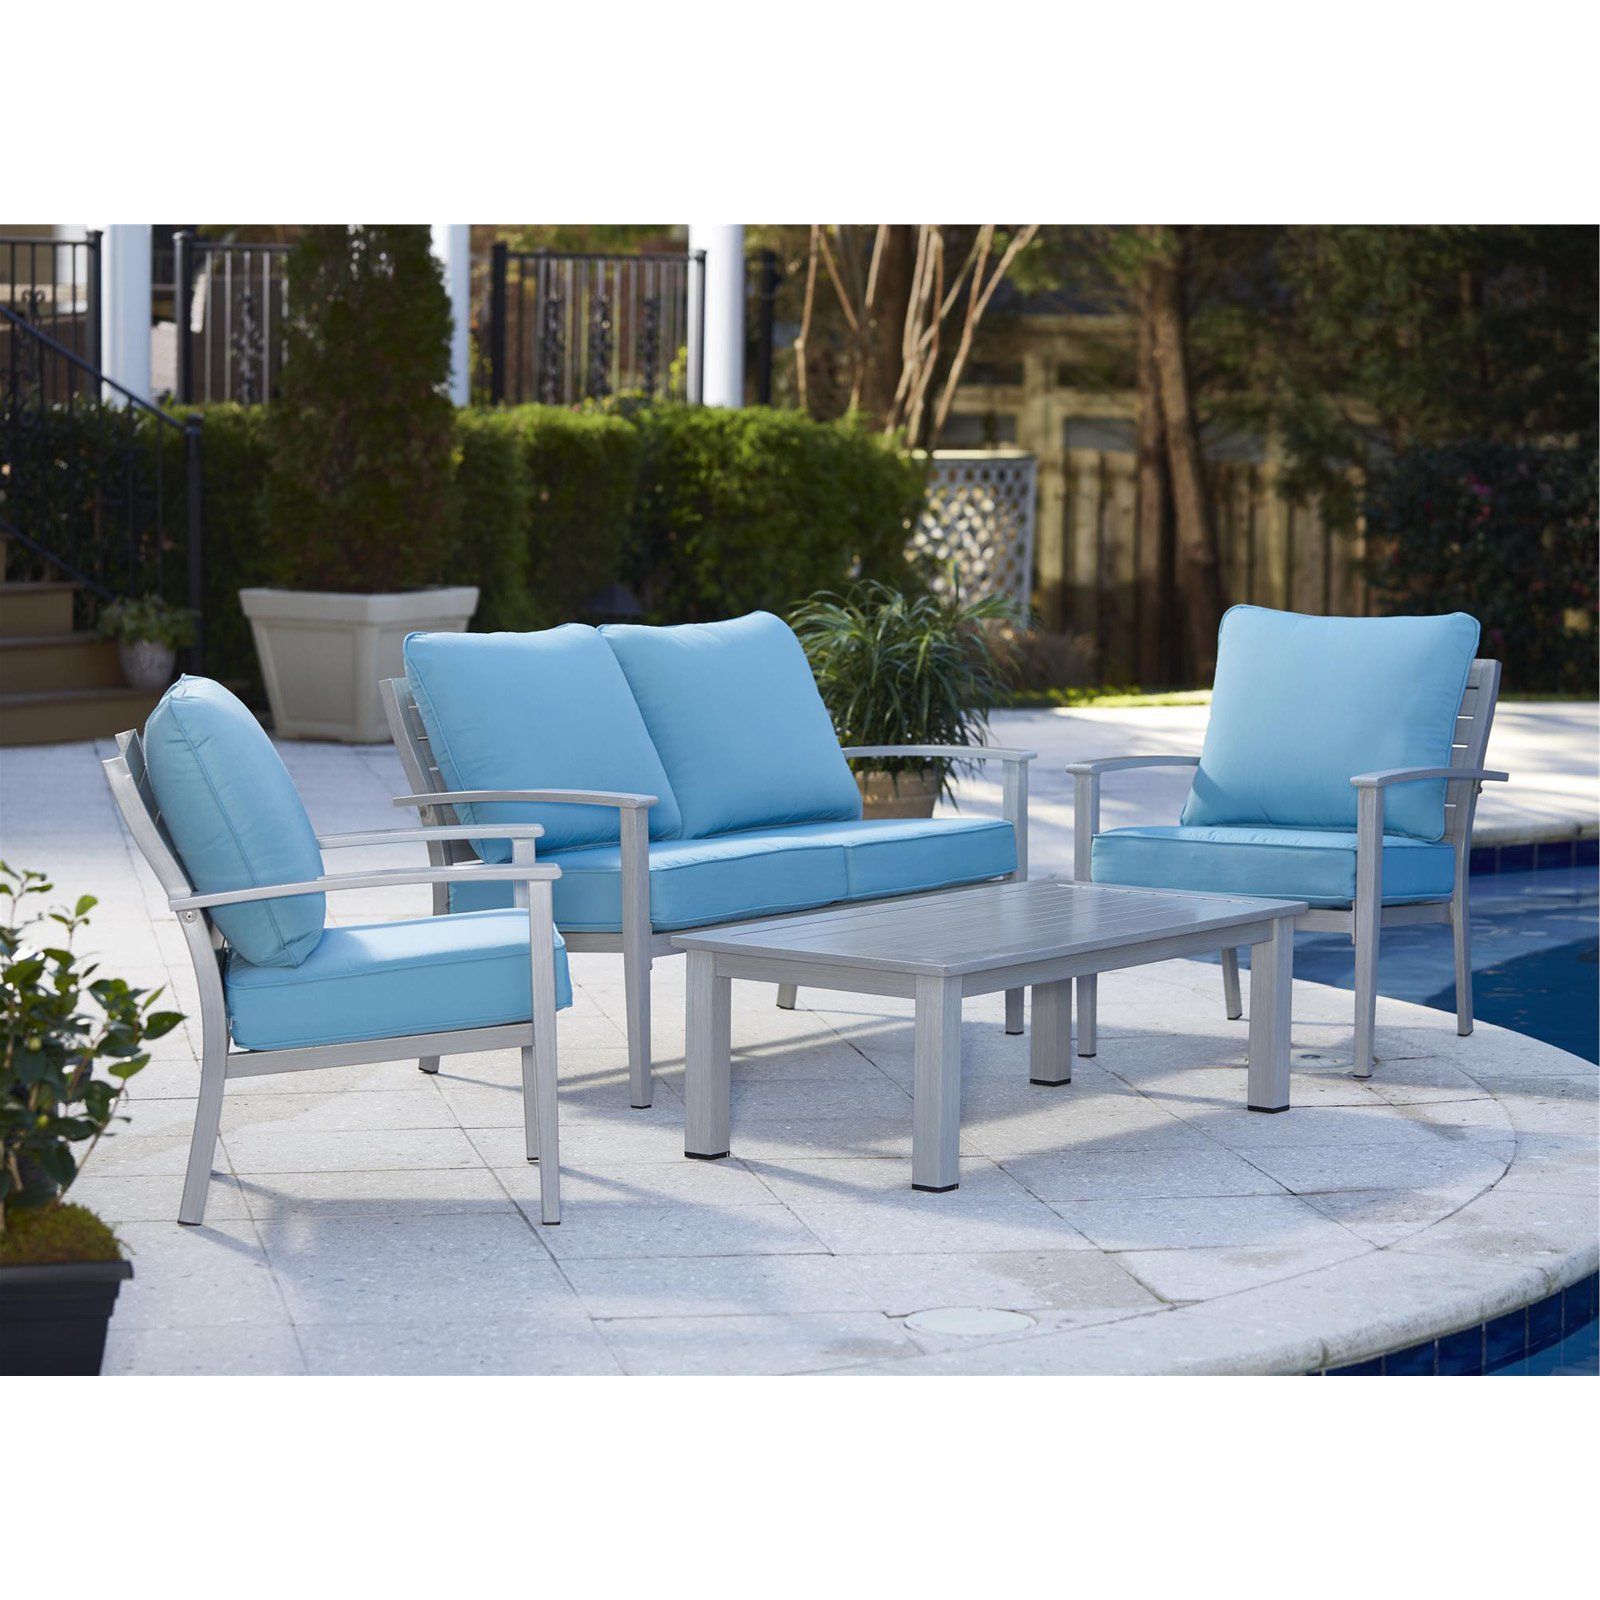 Well Known Patio Conversation Sets And Cushions Pertaining To Cosco Outdoor Living Blue Veil 4 Piece Aluminum Conversation Set, Blue (View 12 of 15)